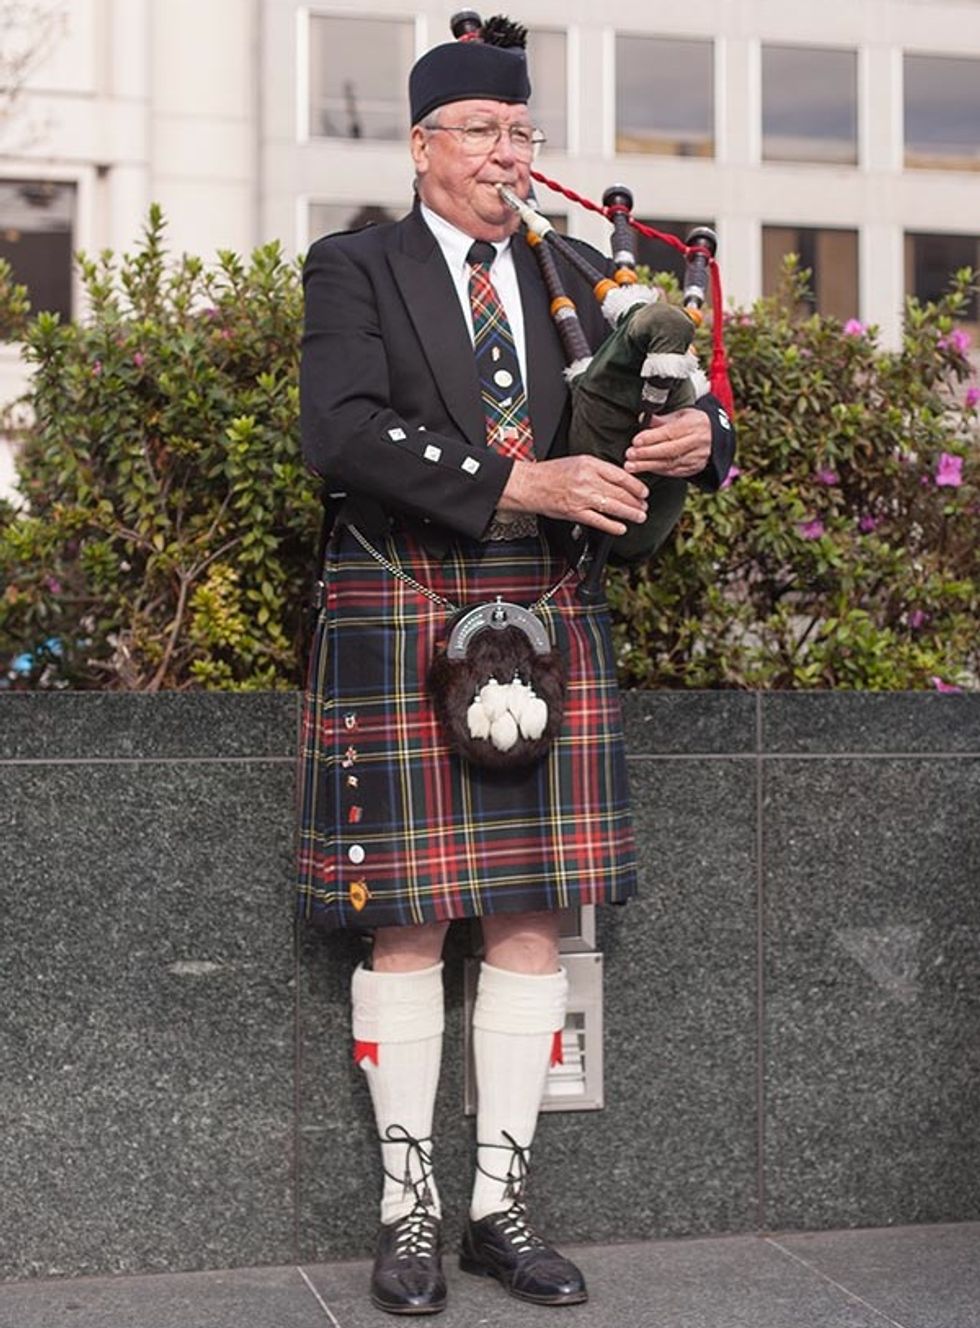 Street Style Report: The Bagpiper in Union Square